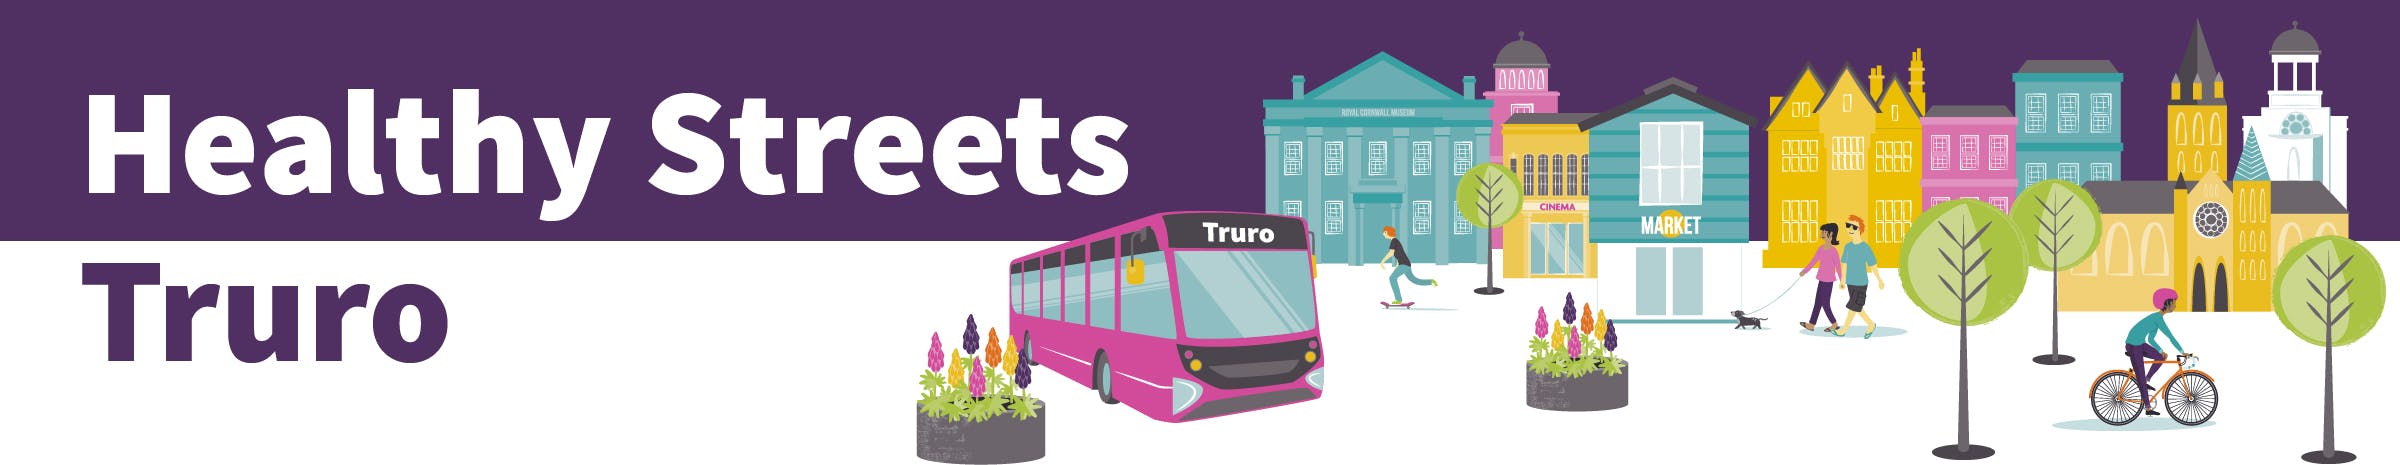 Healthy Streets Truro: creating a better environment for all and revitalising the local economy.